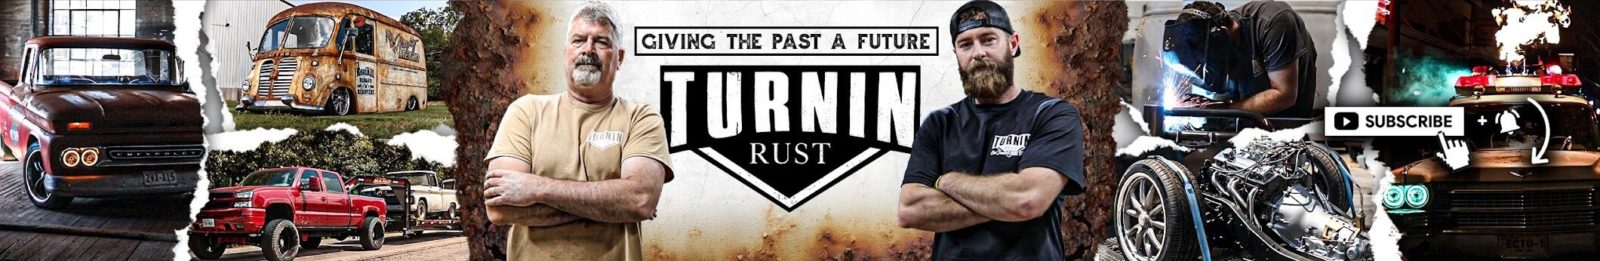 Banner Image: Turnin' Rust Logo with slogan Giving the Past a Future. Photo Lance Bush and Wyatt Bush of Kravened Kustoms, Turnin' Rust, and Restored YouTube channels wearing a BadgeCaps metal badge hat with laser cut stainless steel badge on Richardson flat bill snapback